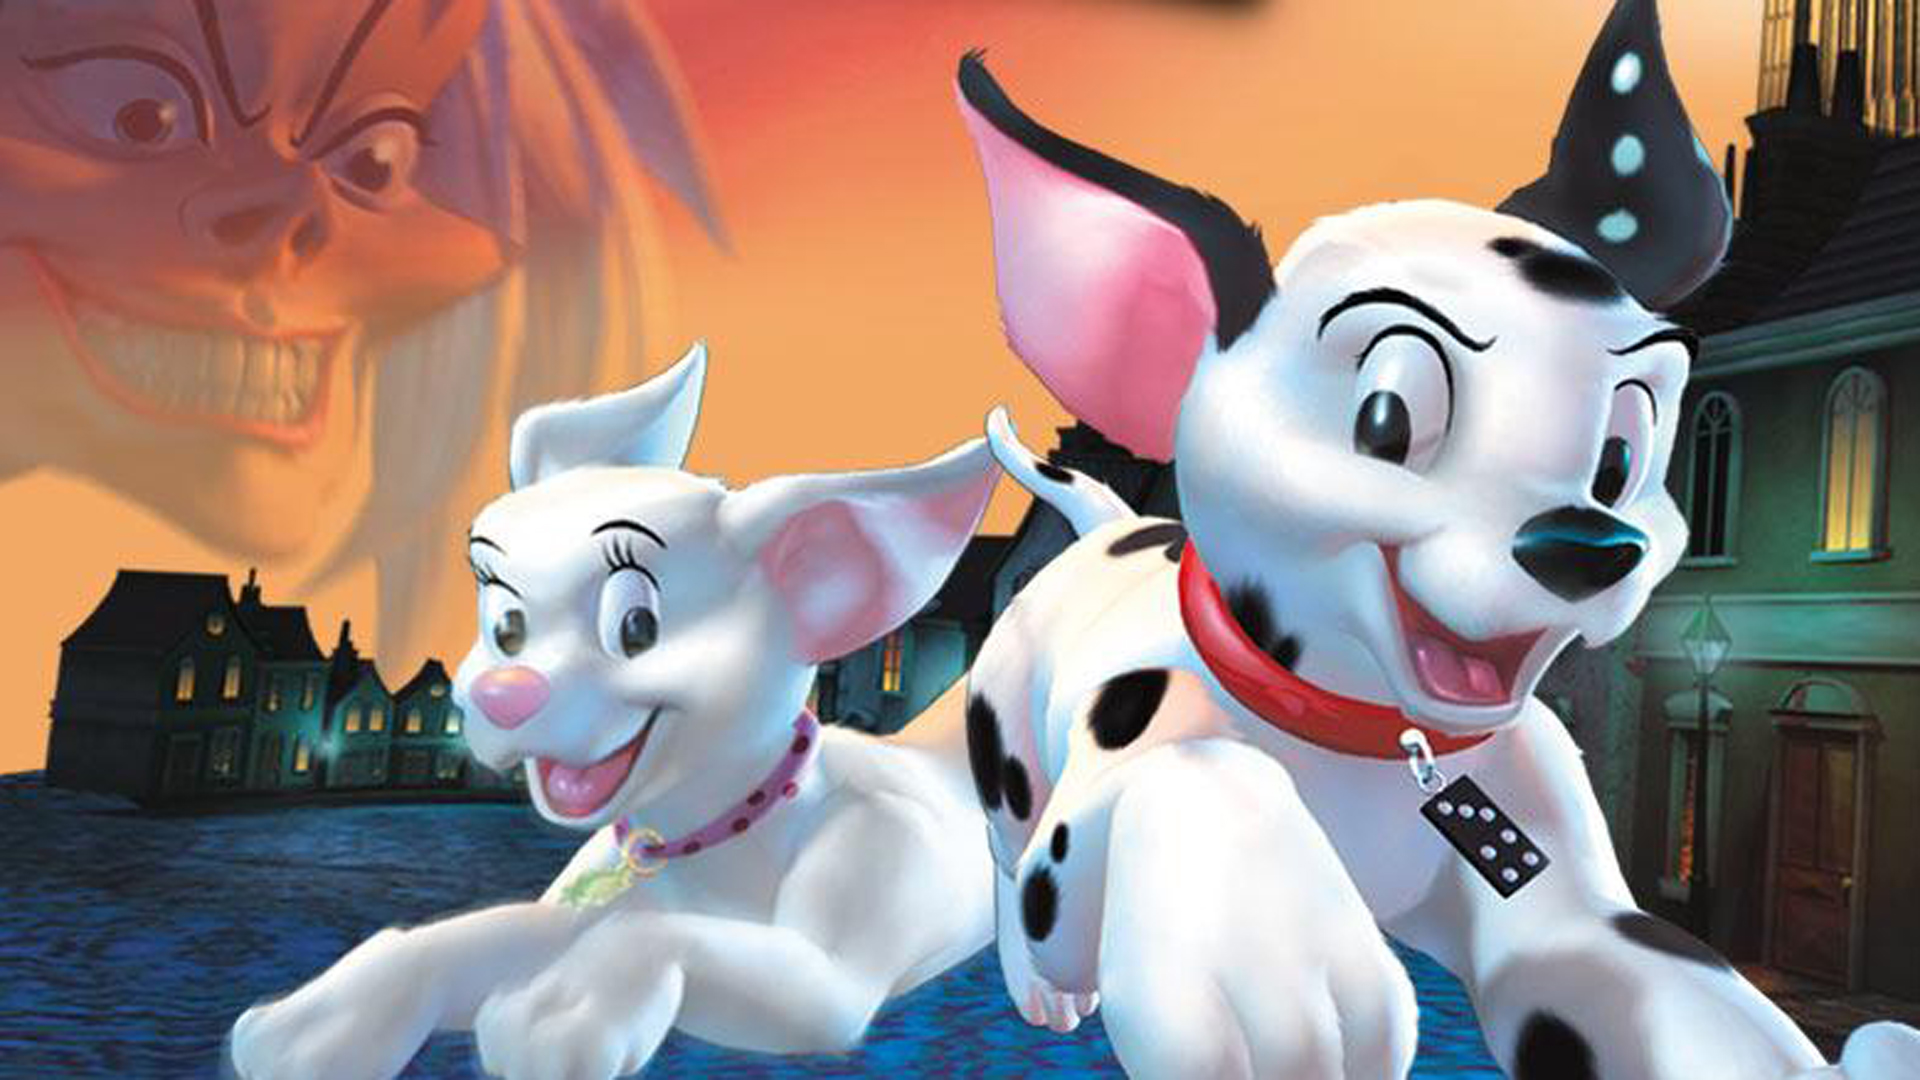 Disney's 102 Dalmatians: Puppies to the Rescue Image Games Database